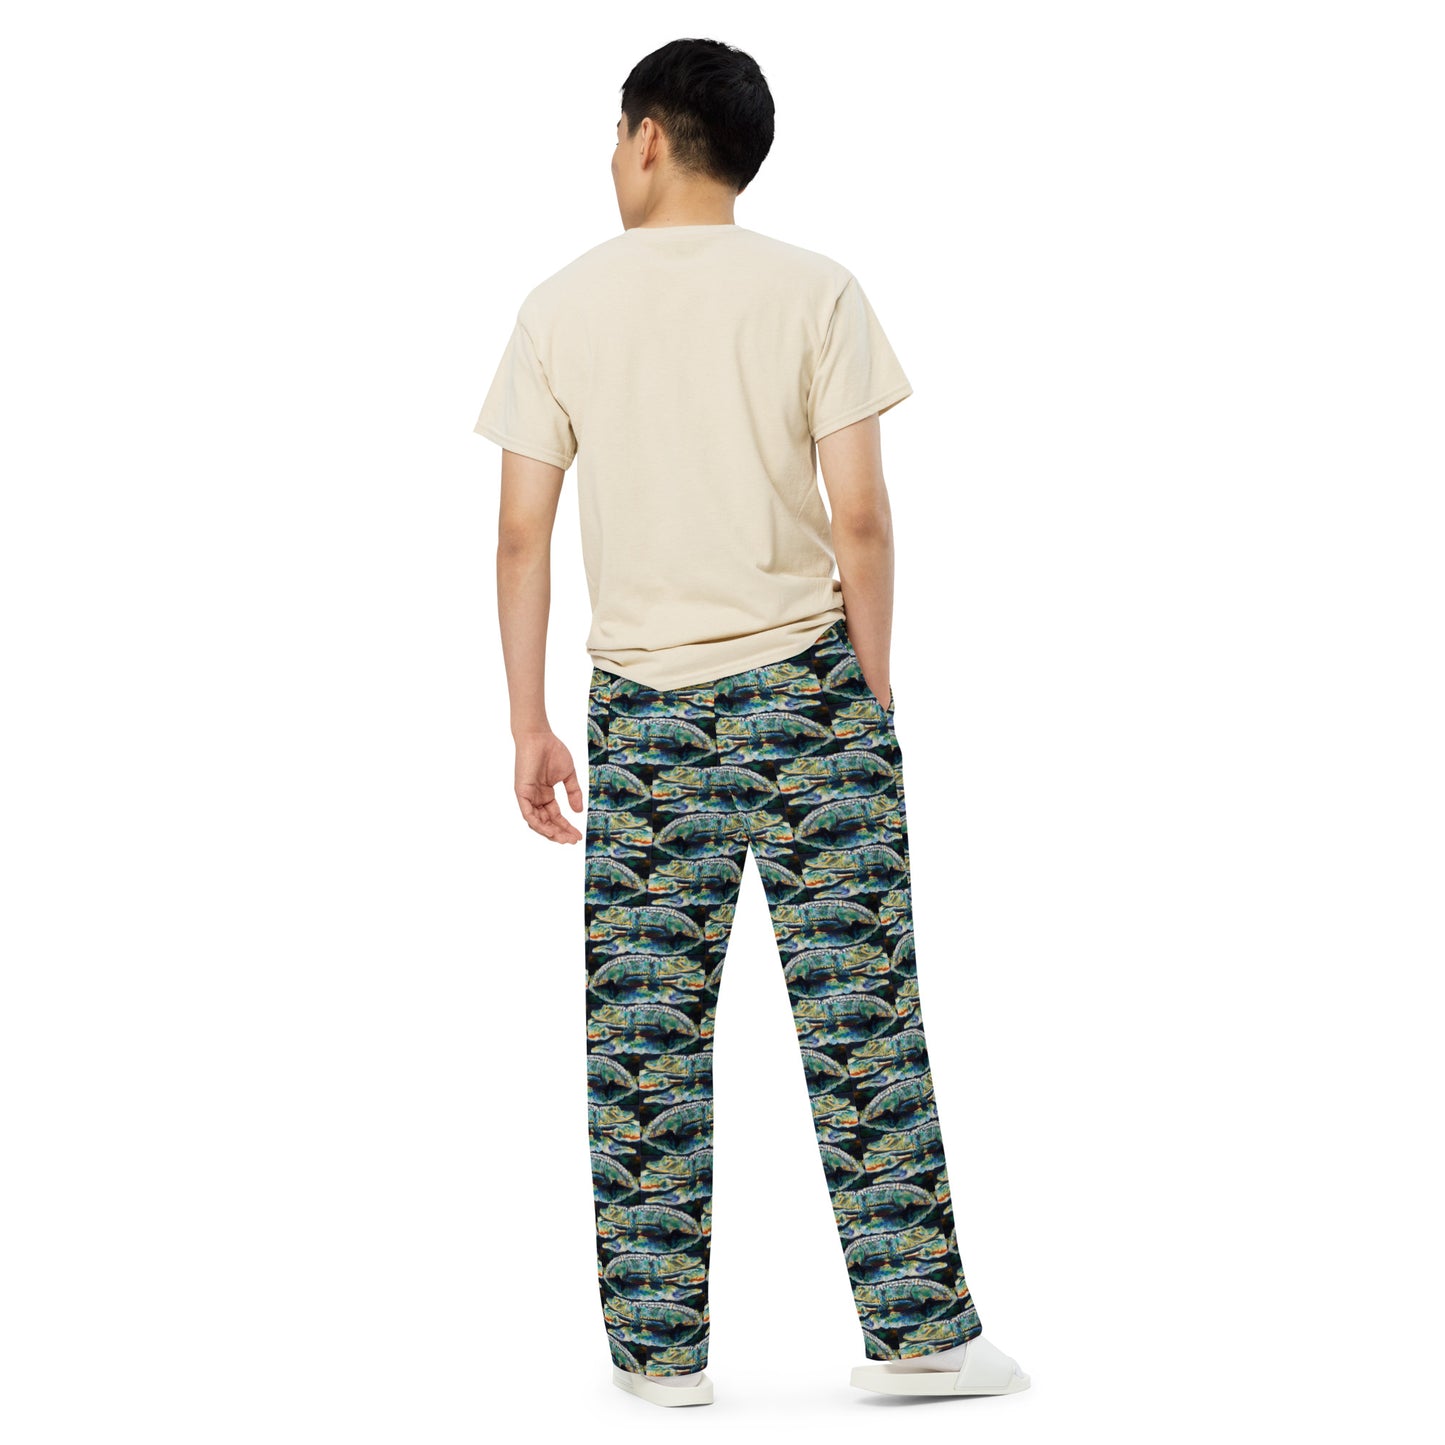 Psychedelic Gator Brick Pattern All-over print unisex wide-leg pants